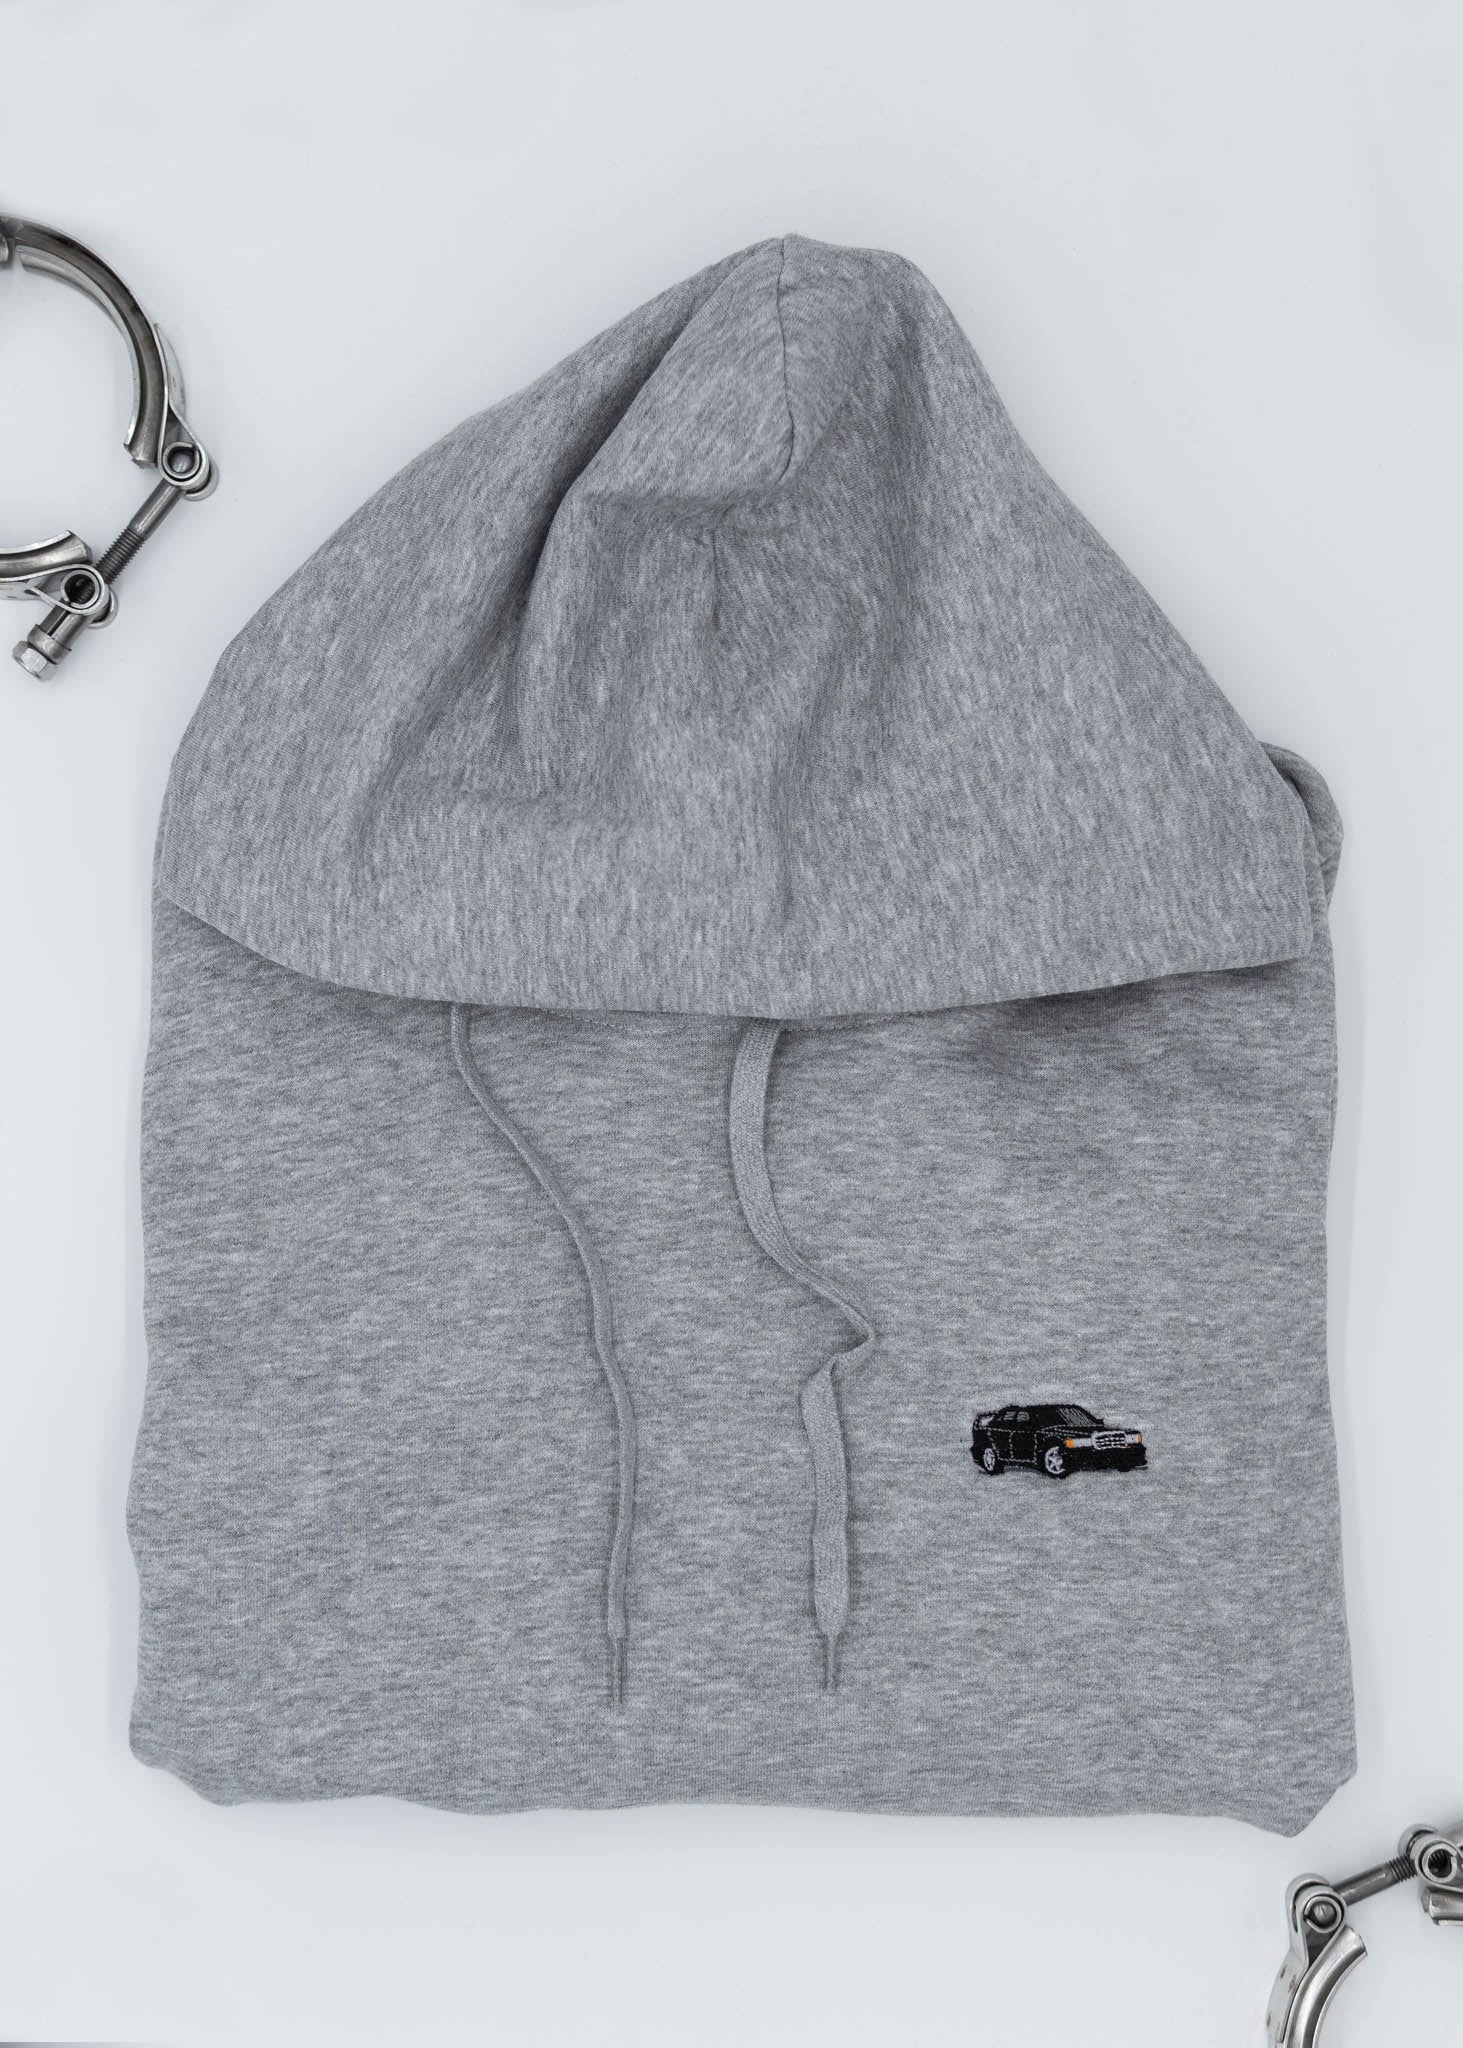 A grey Mercedes-Benz unisex hoodie for men and women. Photo is a close up view of the sweater with an embroidered Mercedes-Benz W201 190E 2.5-16 Evo II. Fabric composition is cotton, polyester, and rayon. The material is very soft, stretchy, and non-transparent. The style of this hoodie is long sleeve, crewneck with a hood, hooded, with embroidery on the left chest.